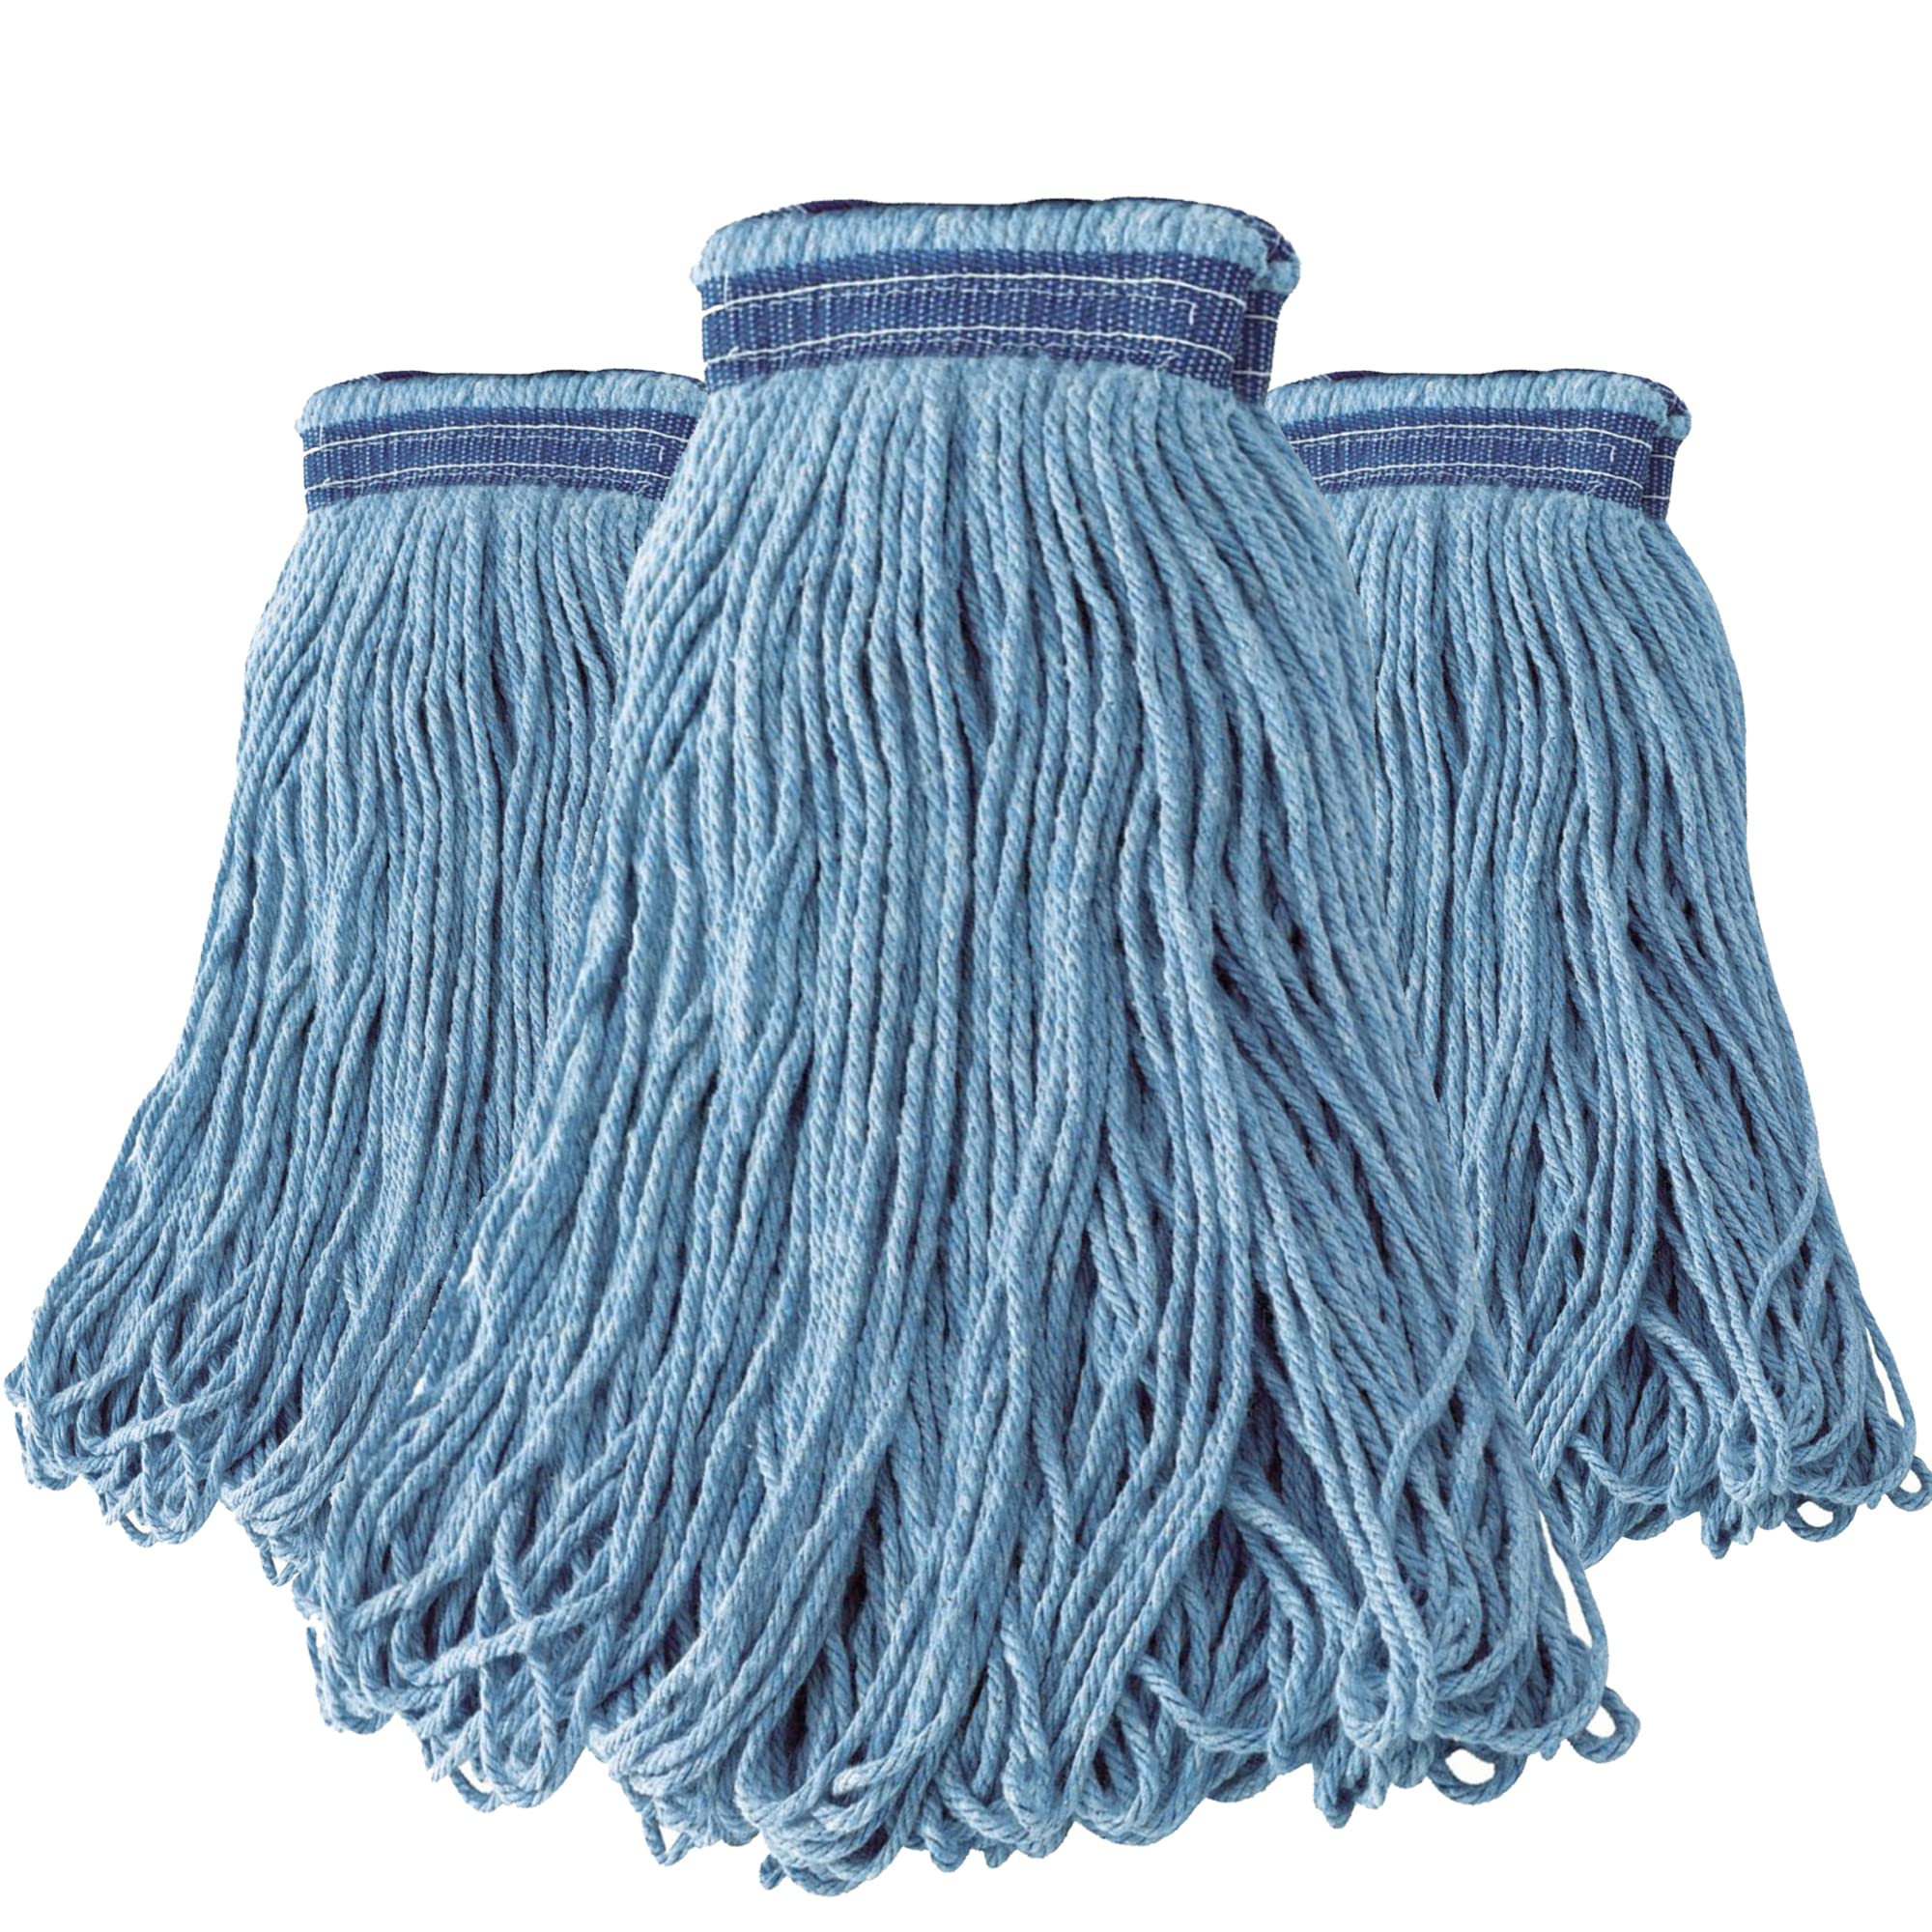 3 Pack) Mop Head Replacement, Mop Heads Commercial Blue Cotton Looped End  String, Wet Industrial Cleaning